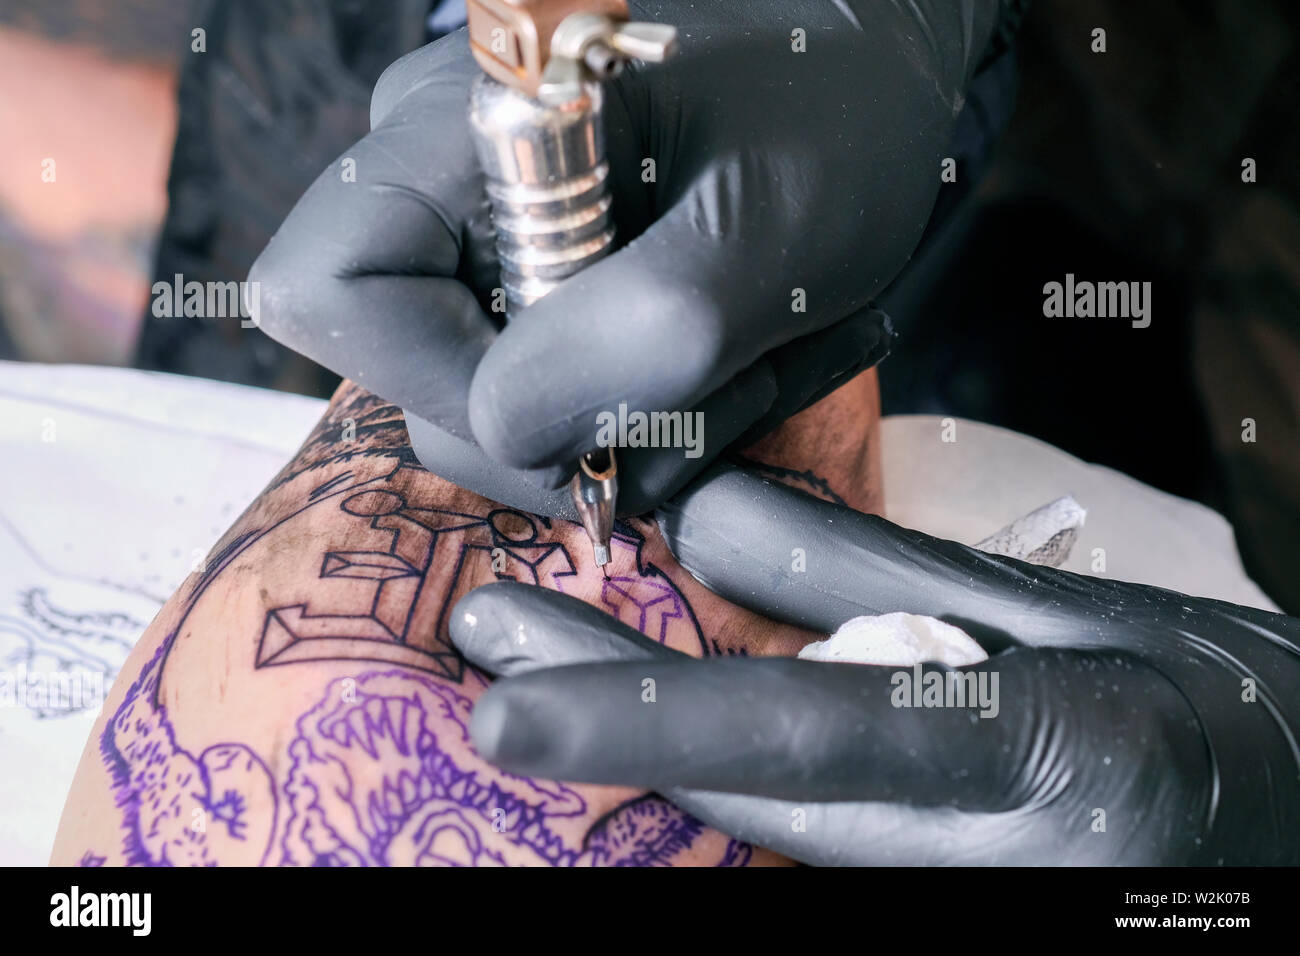 A Tattooist or tattoo artist works on a client creating a tattoo or piece of body art using an electric tattoo machine. Stock Photo